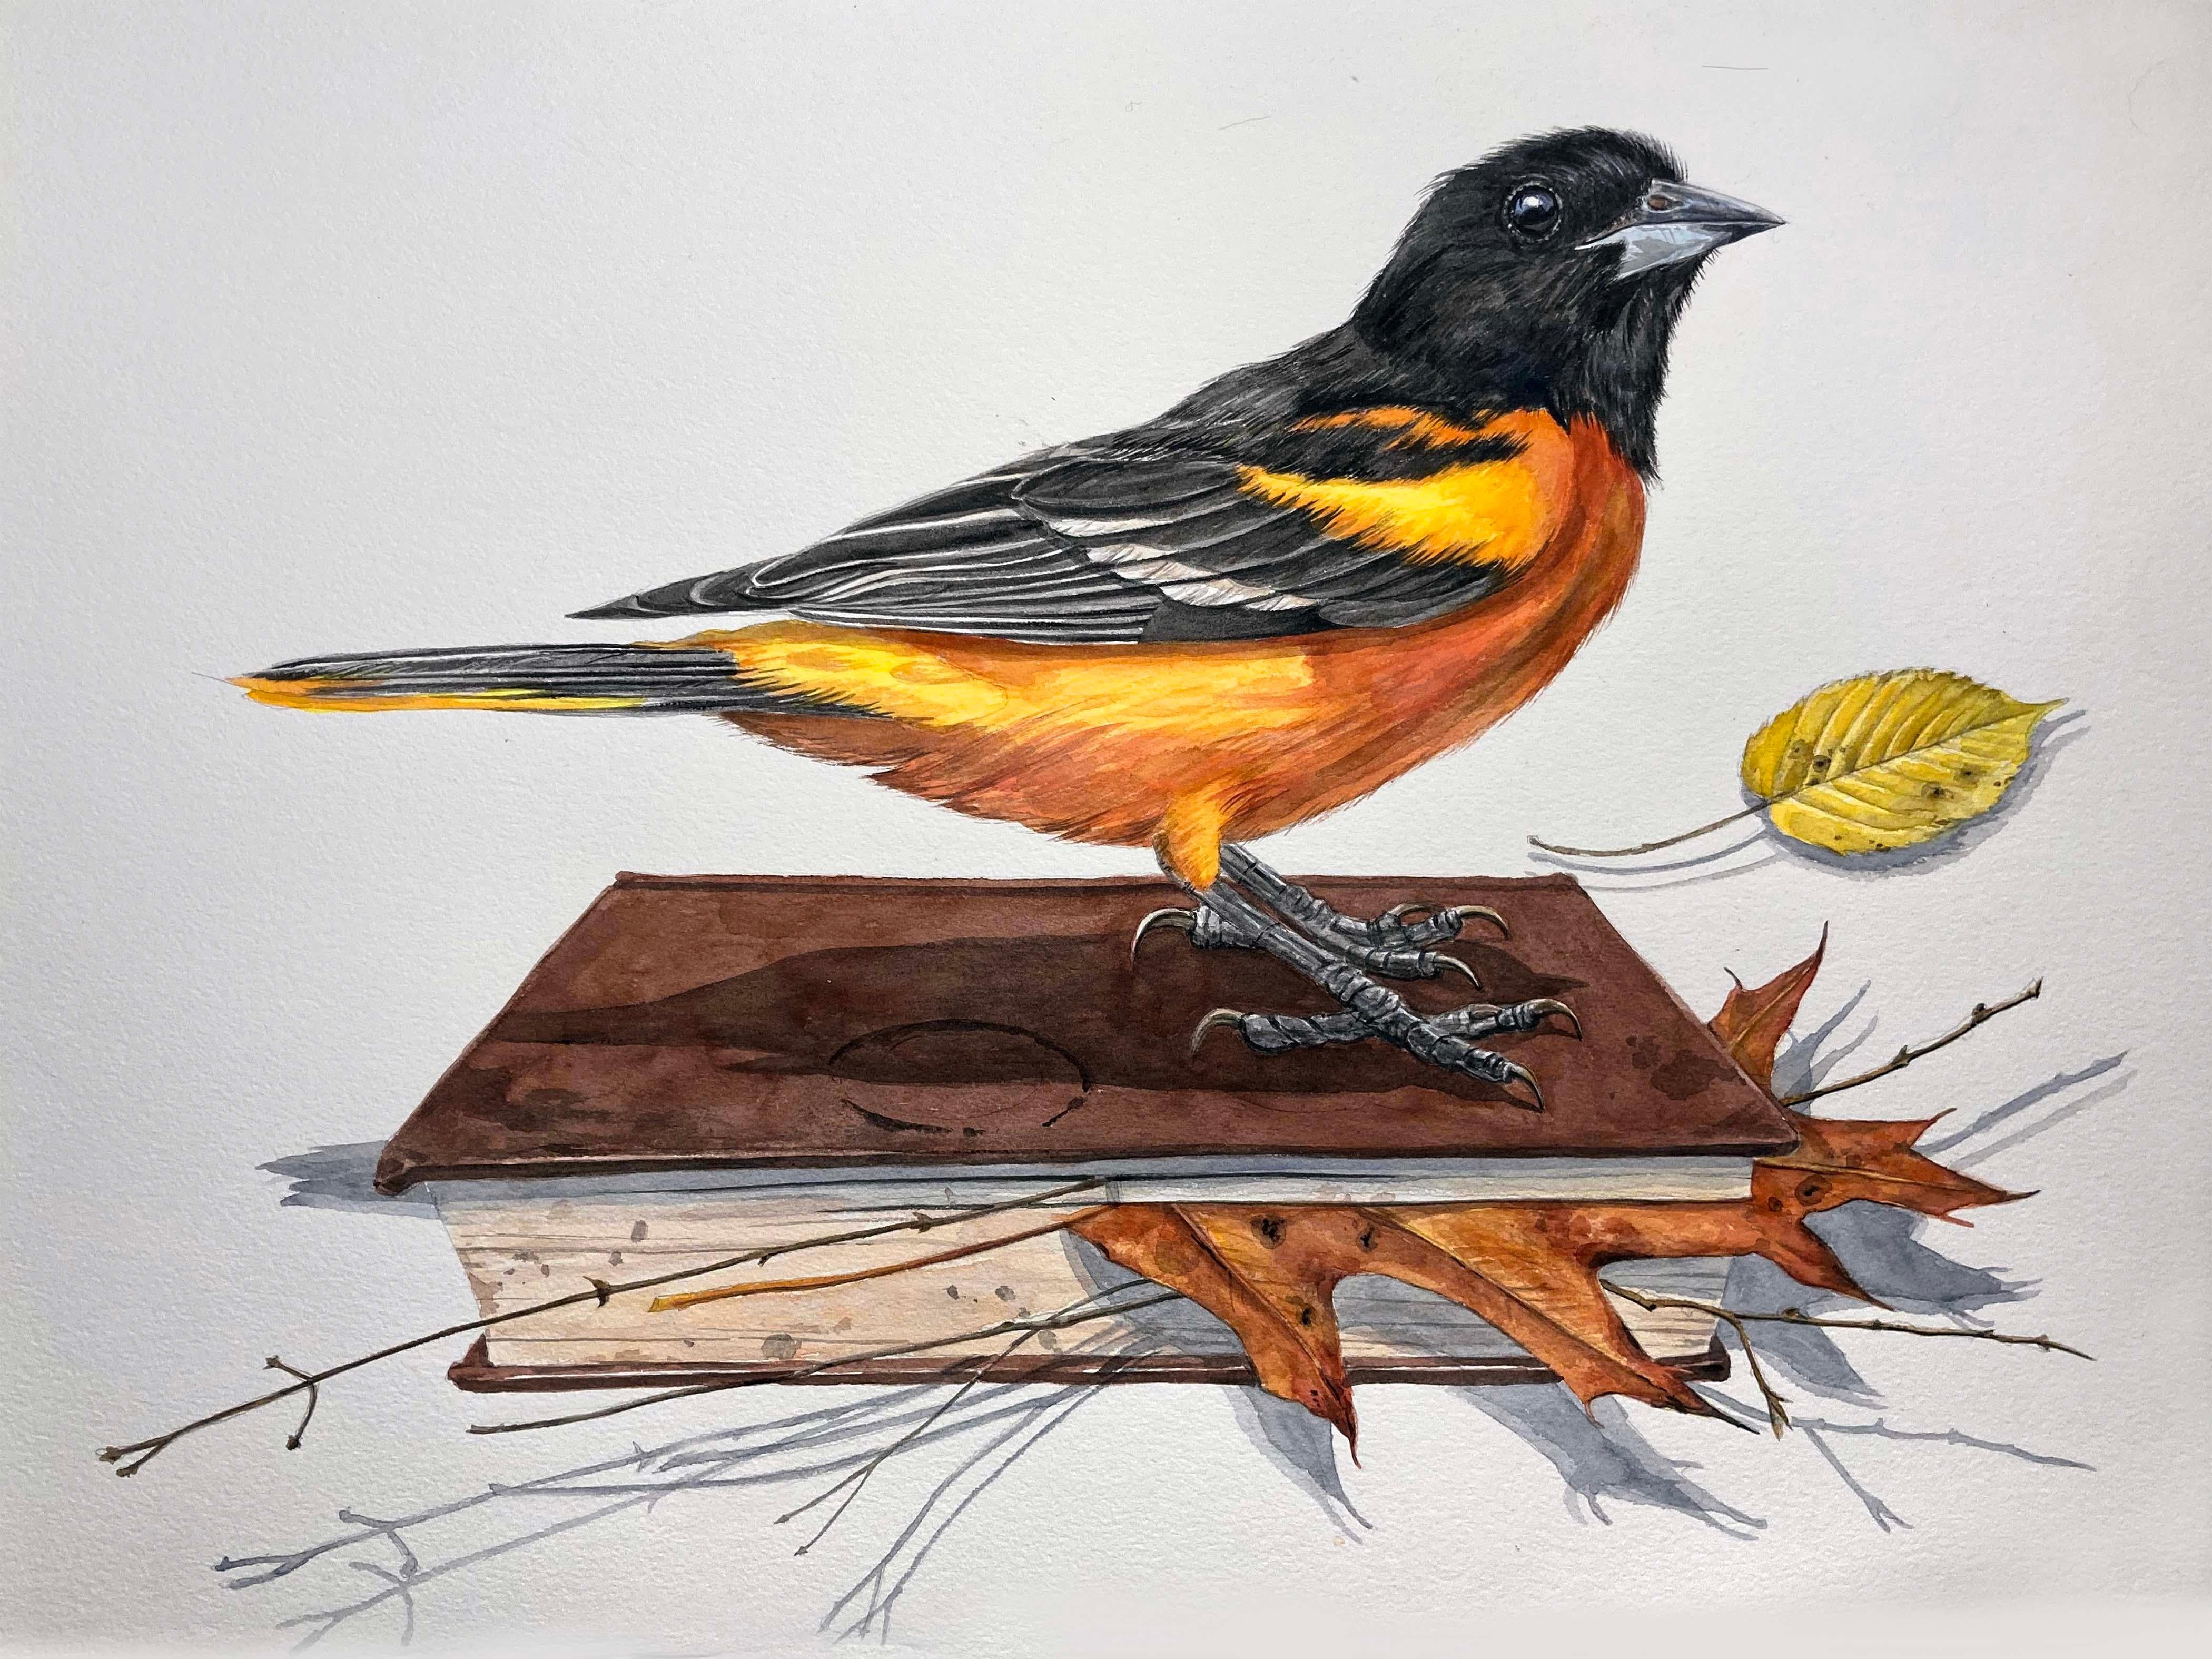 "Season Marker" Watercolor with Baltimore Oriole, book and leaves